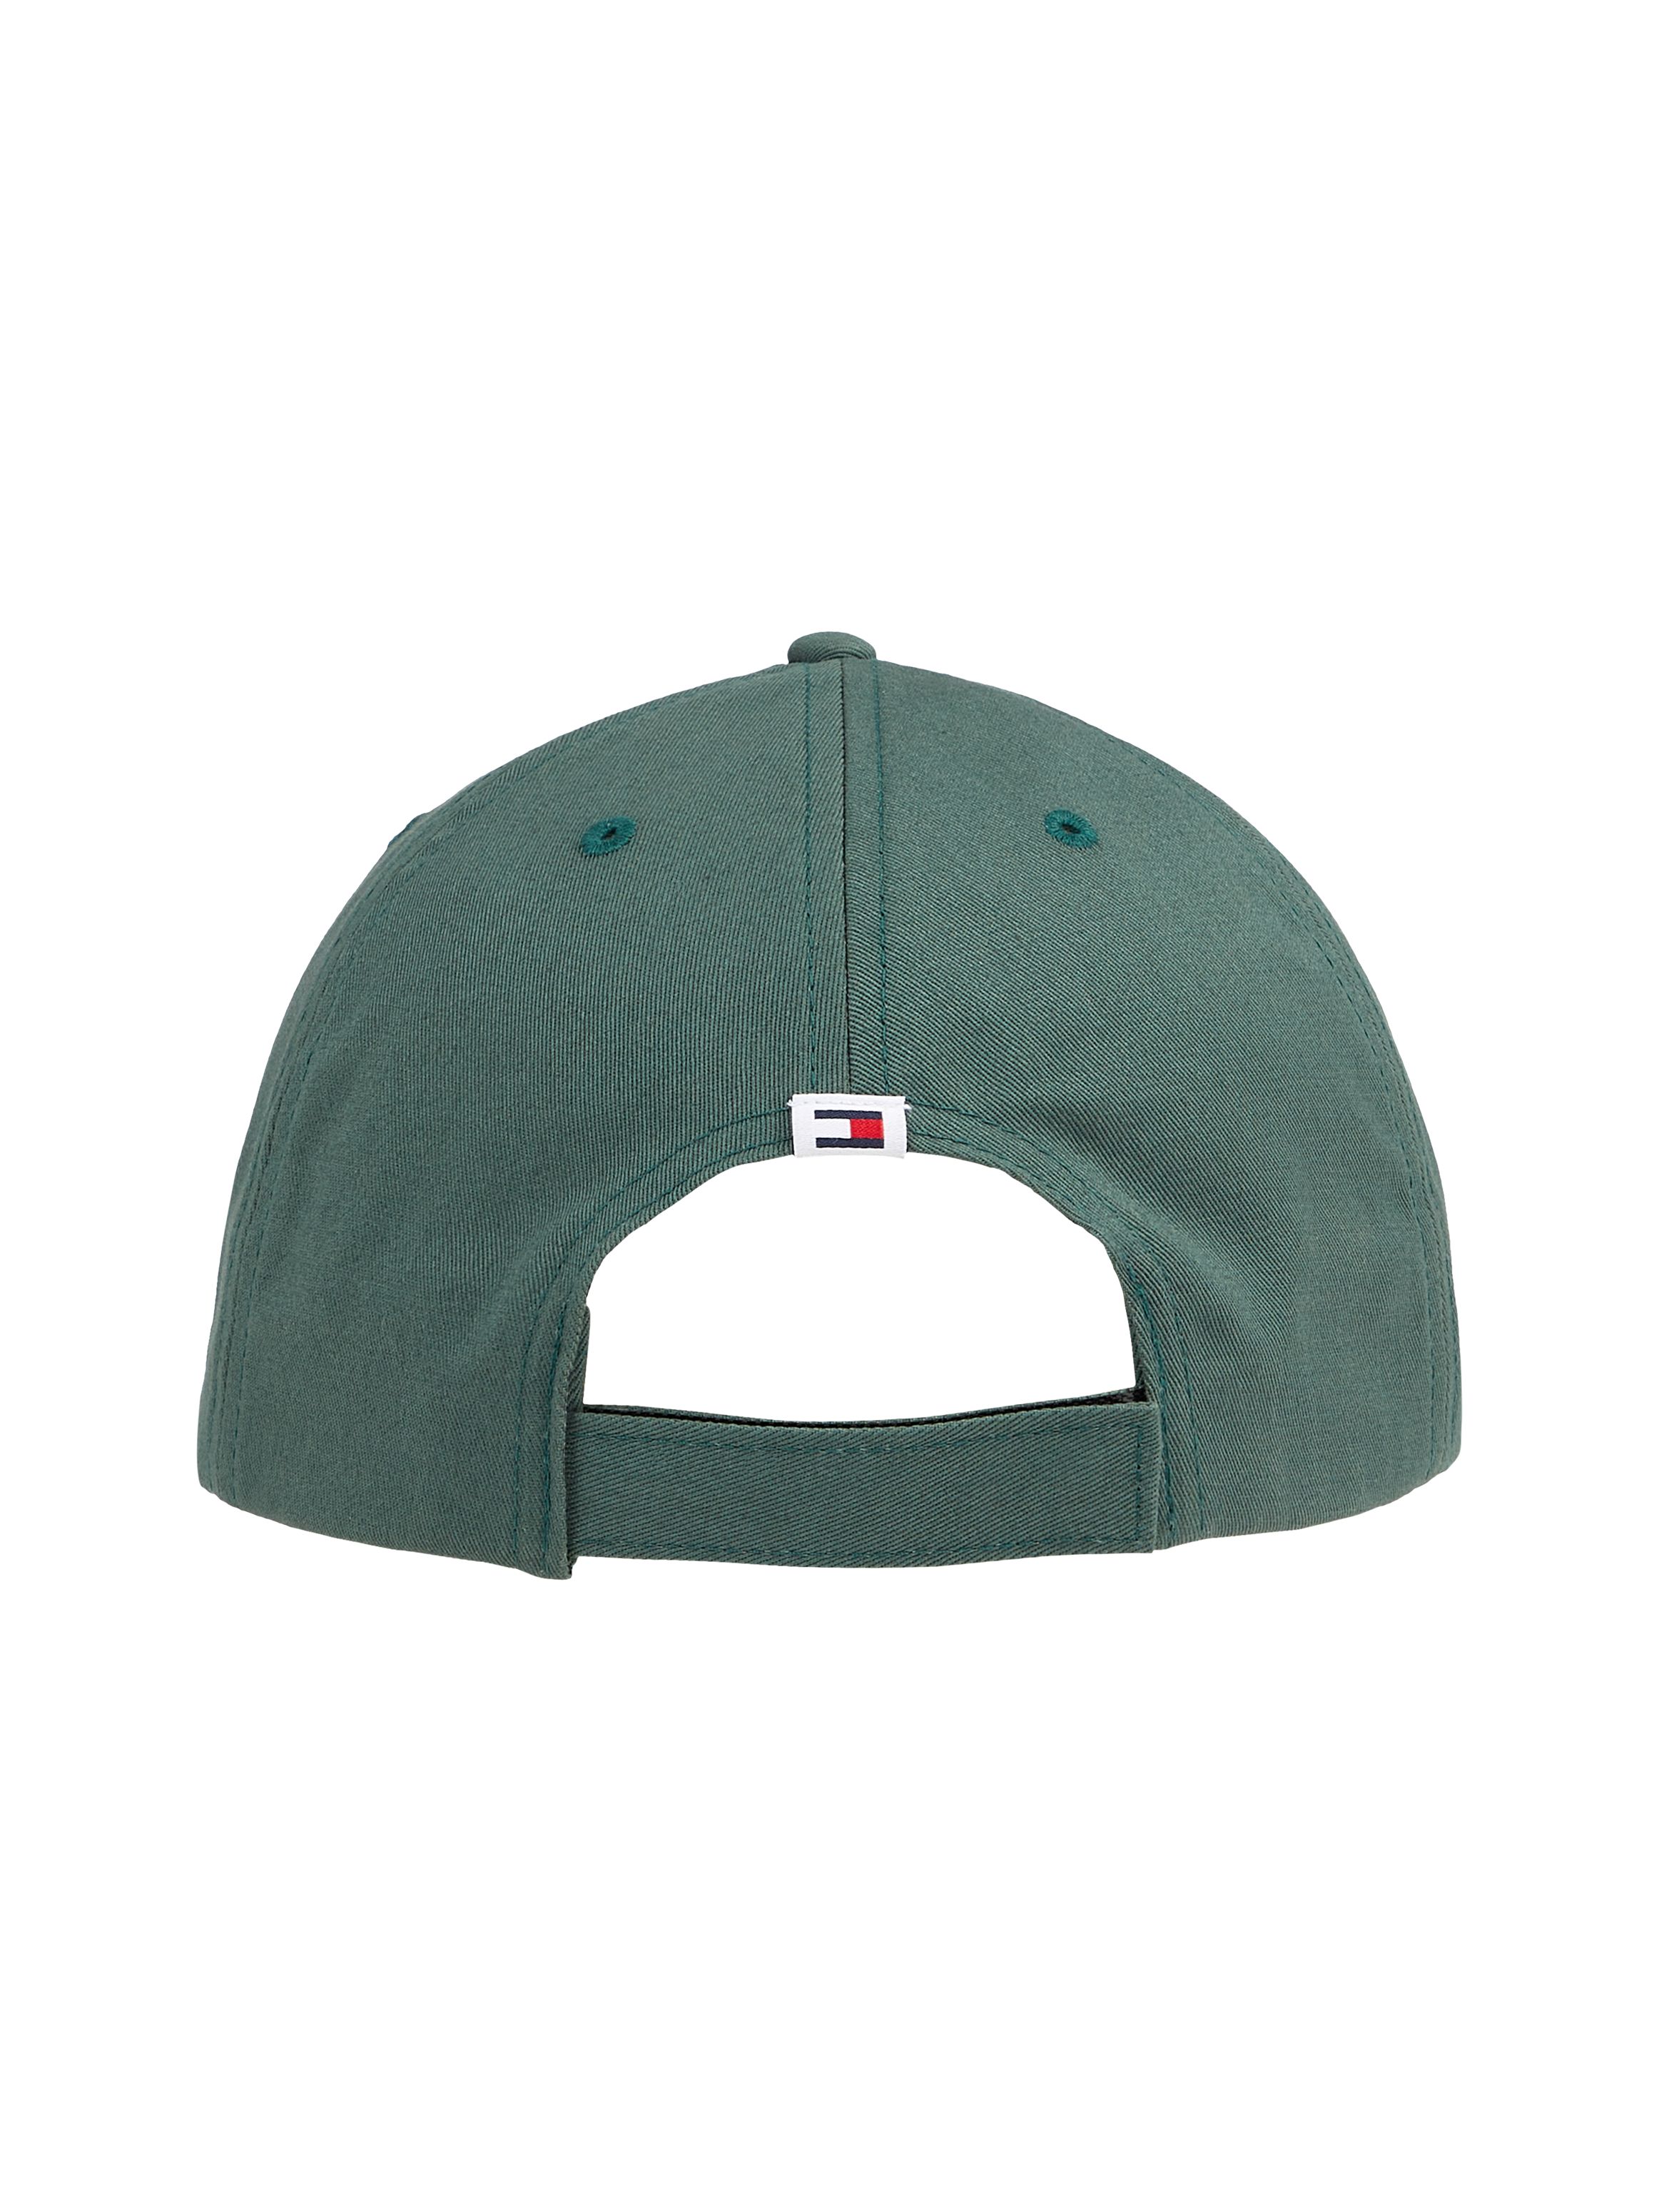 Tommy Jeans Logo Embroidery Baseball Cap